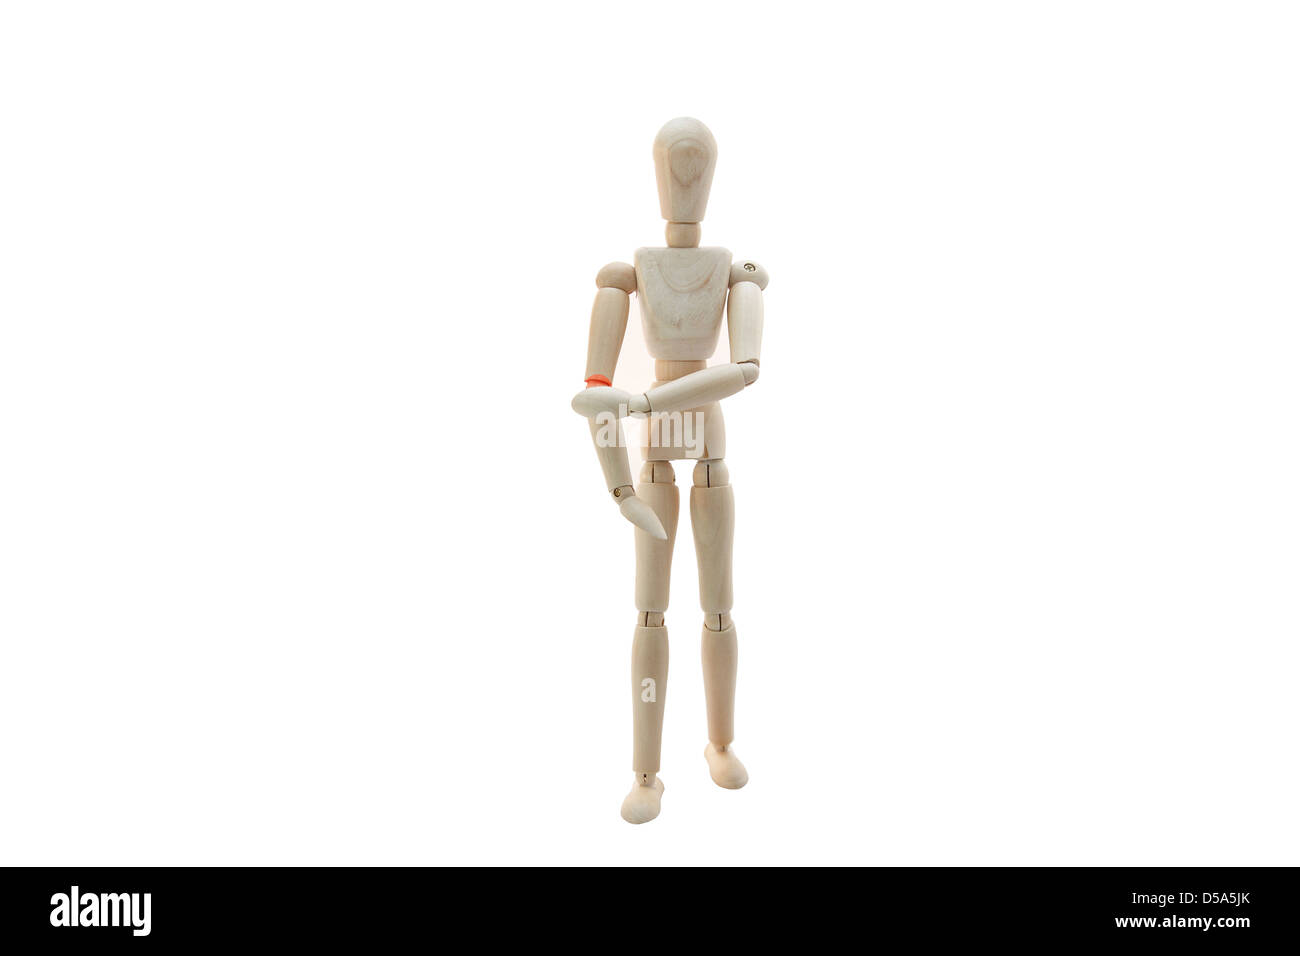 A Wooden Manikin Doll Suffering From RSI Stock Photo